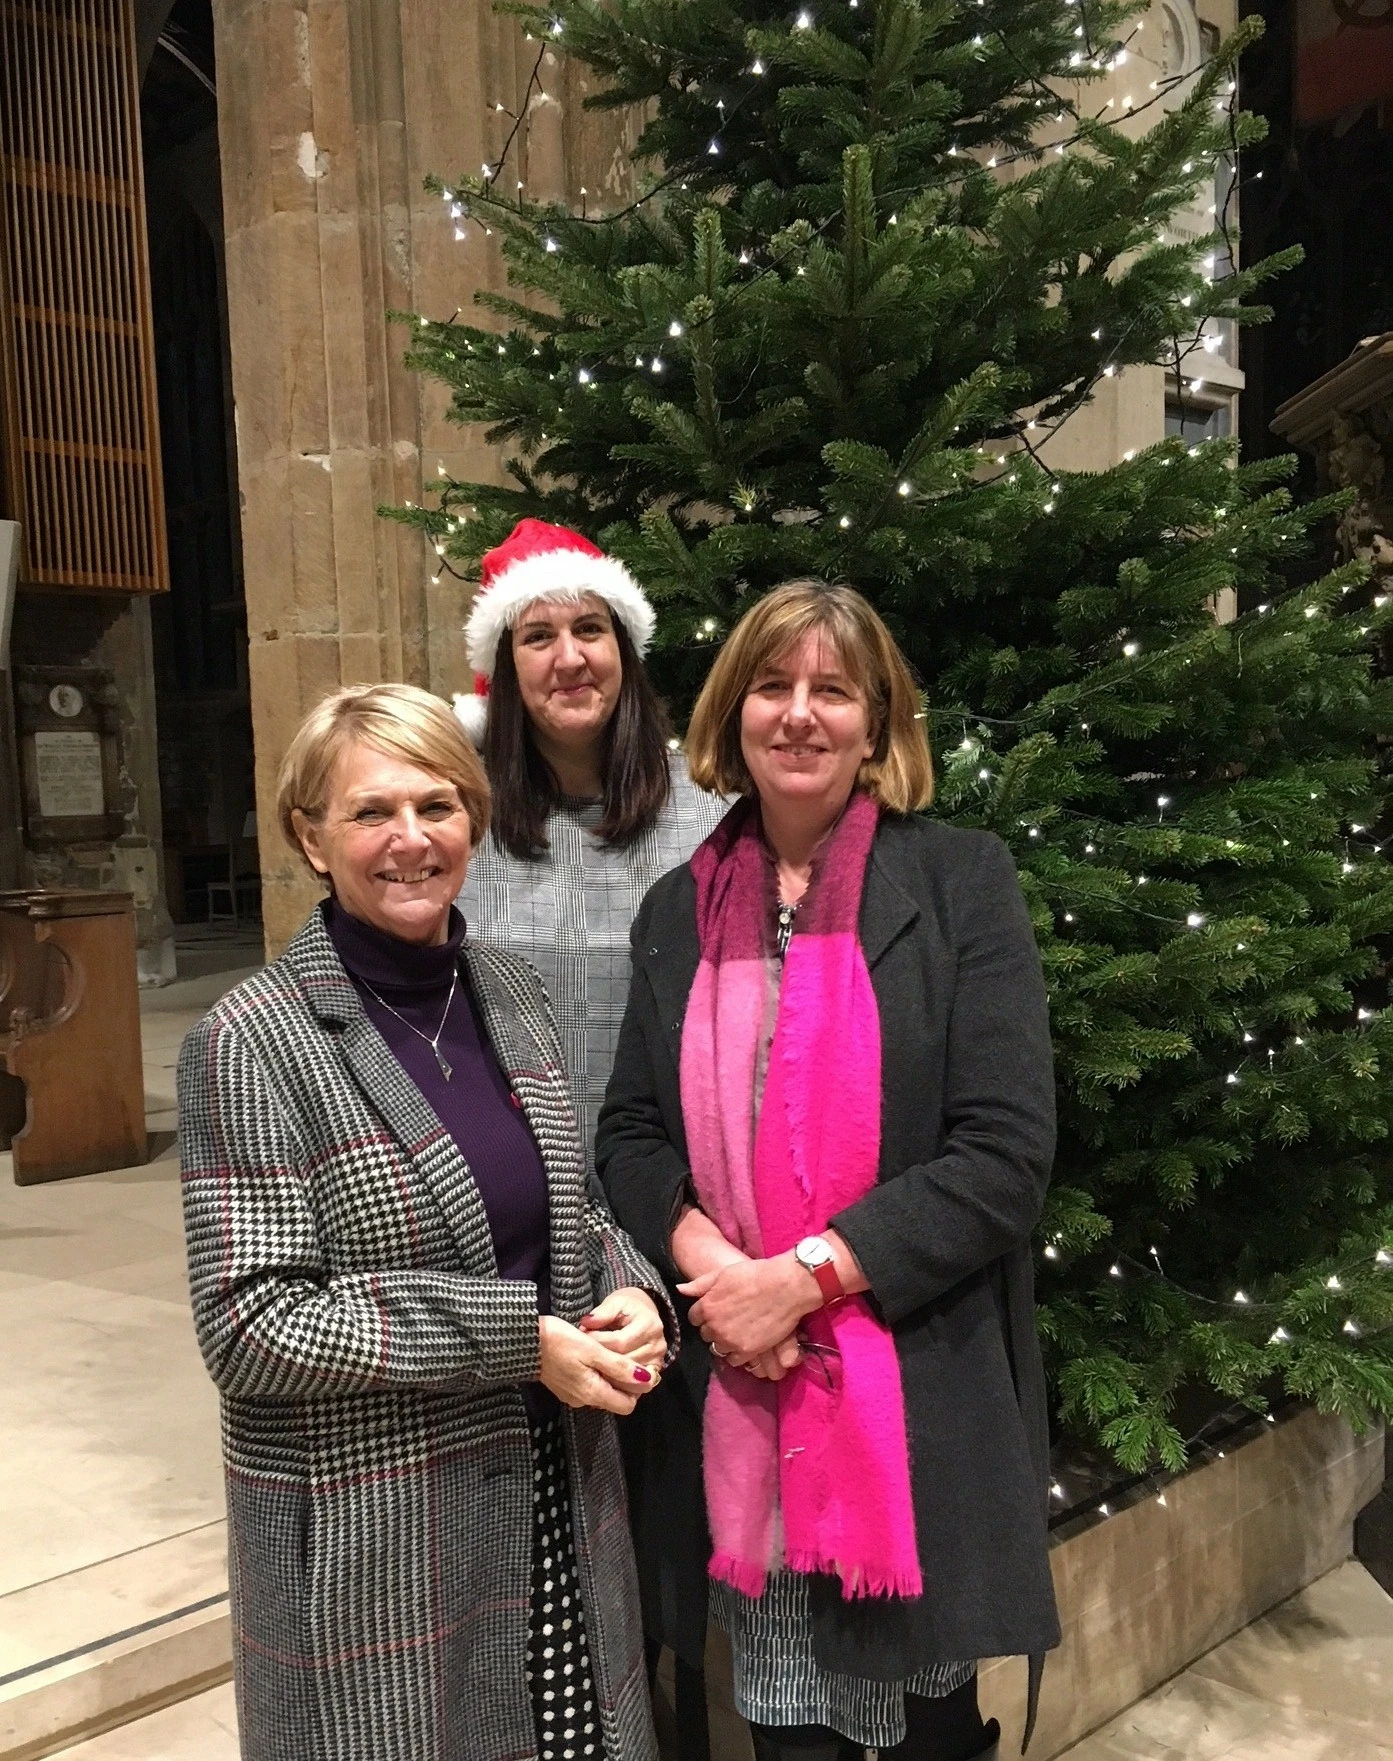 Picture caption: Carols for a great cause: l to r Deborah Adams and Sarah Herrett from Breast Cancer Care with Vanessa Fox at the Sheffield Cathedral event. 